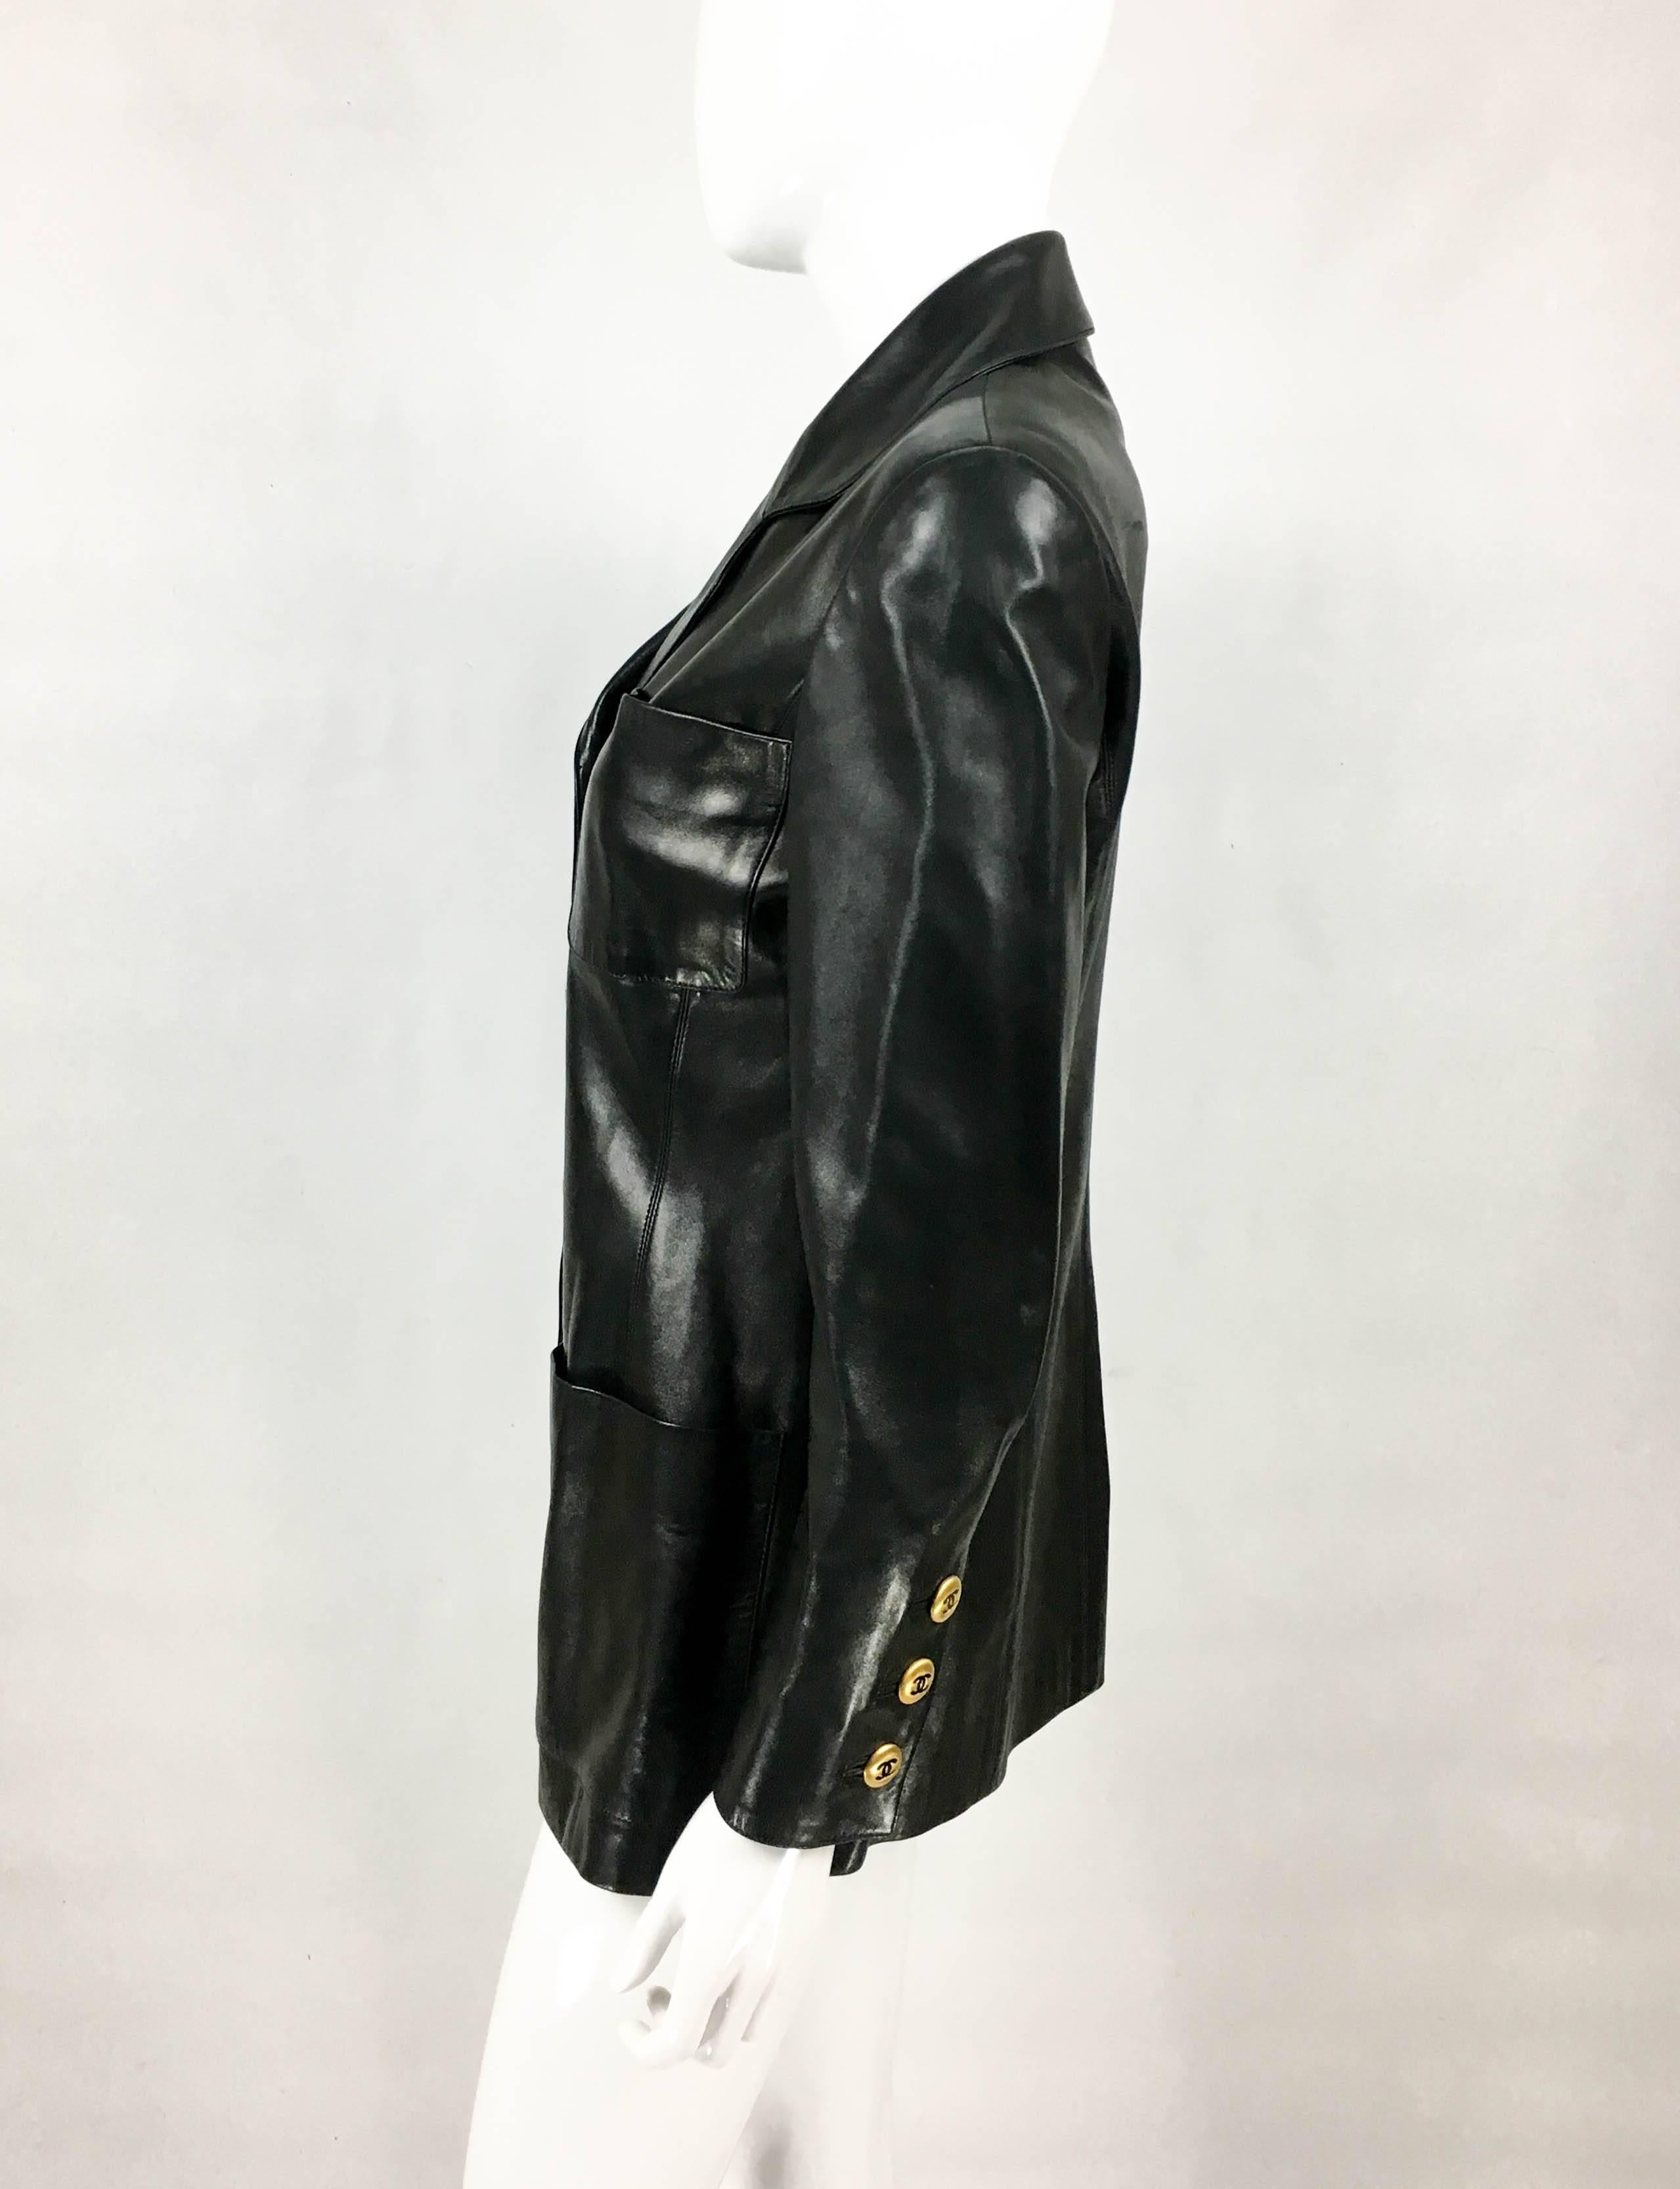 1992 Chanel Runway Look Black Leather Jacket With Quilted Shoulder 1